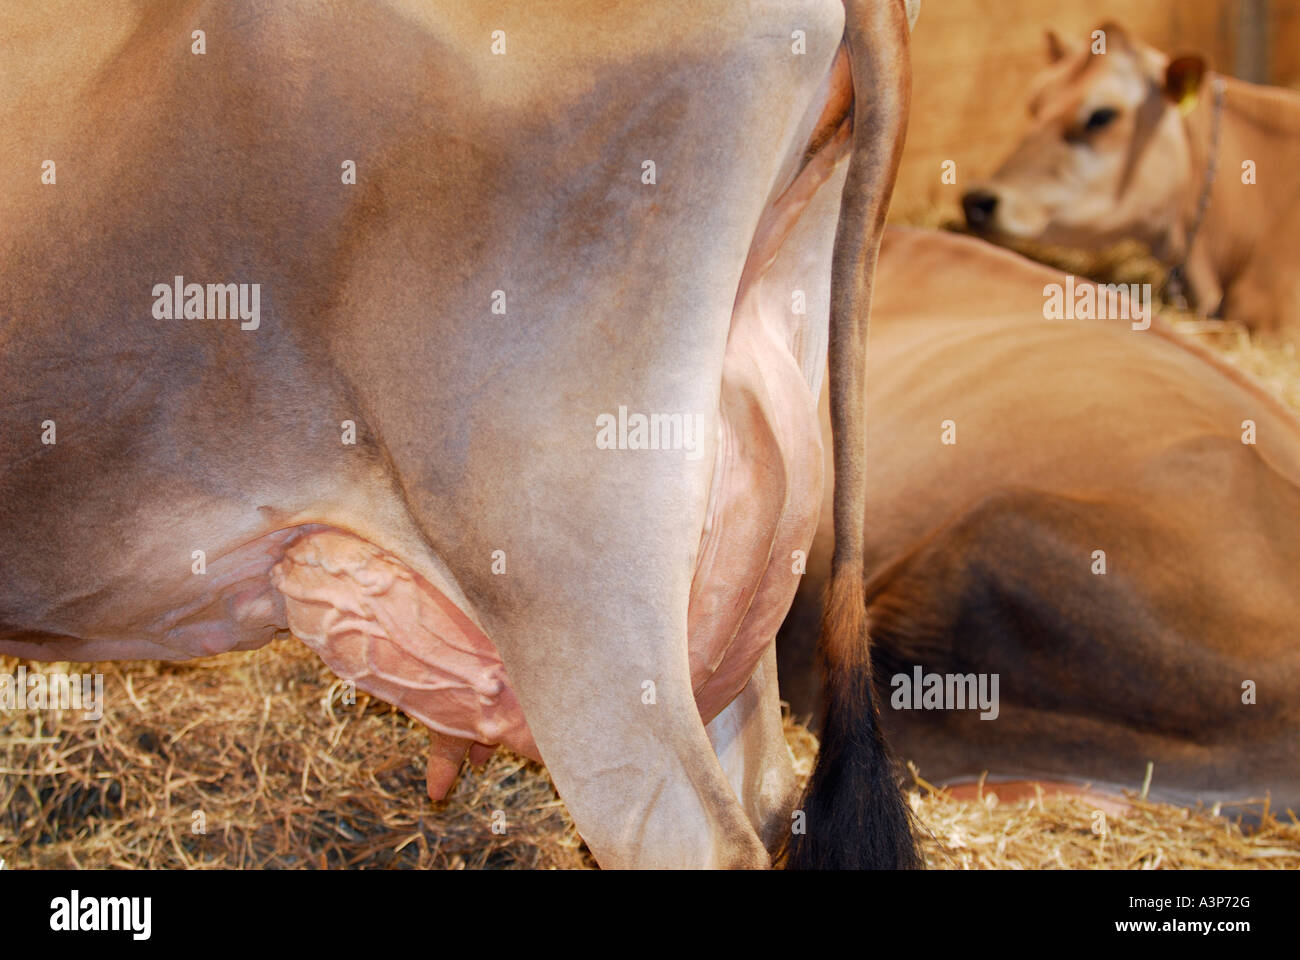 Jersey milk cows in the barn showing full udder Stock Photo